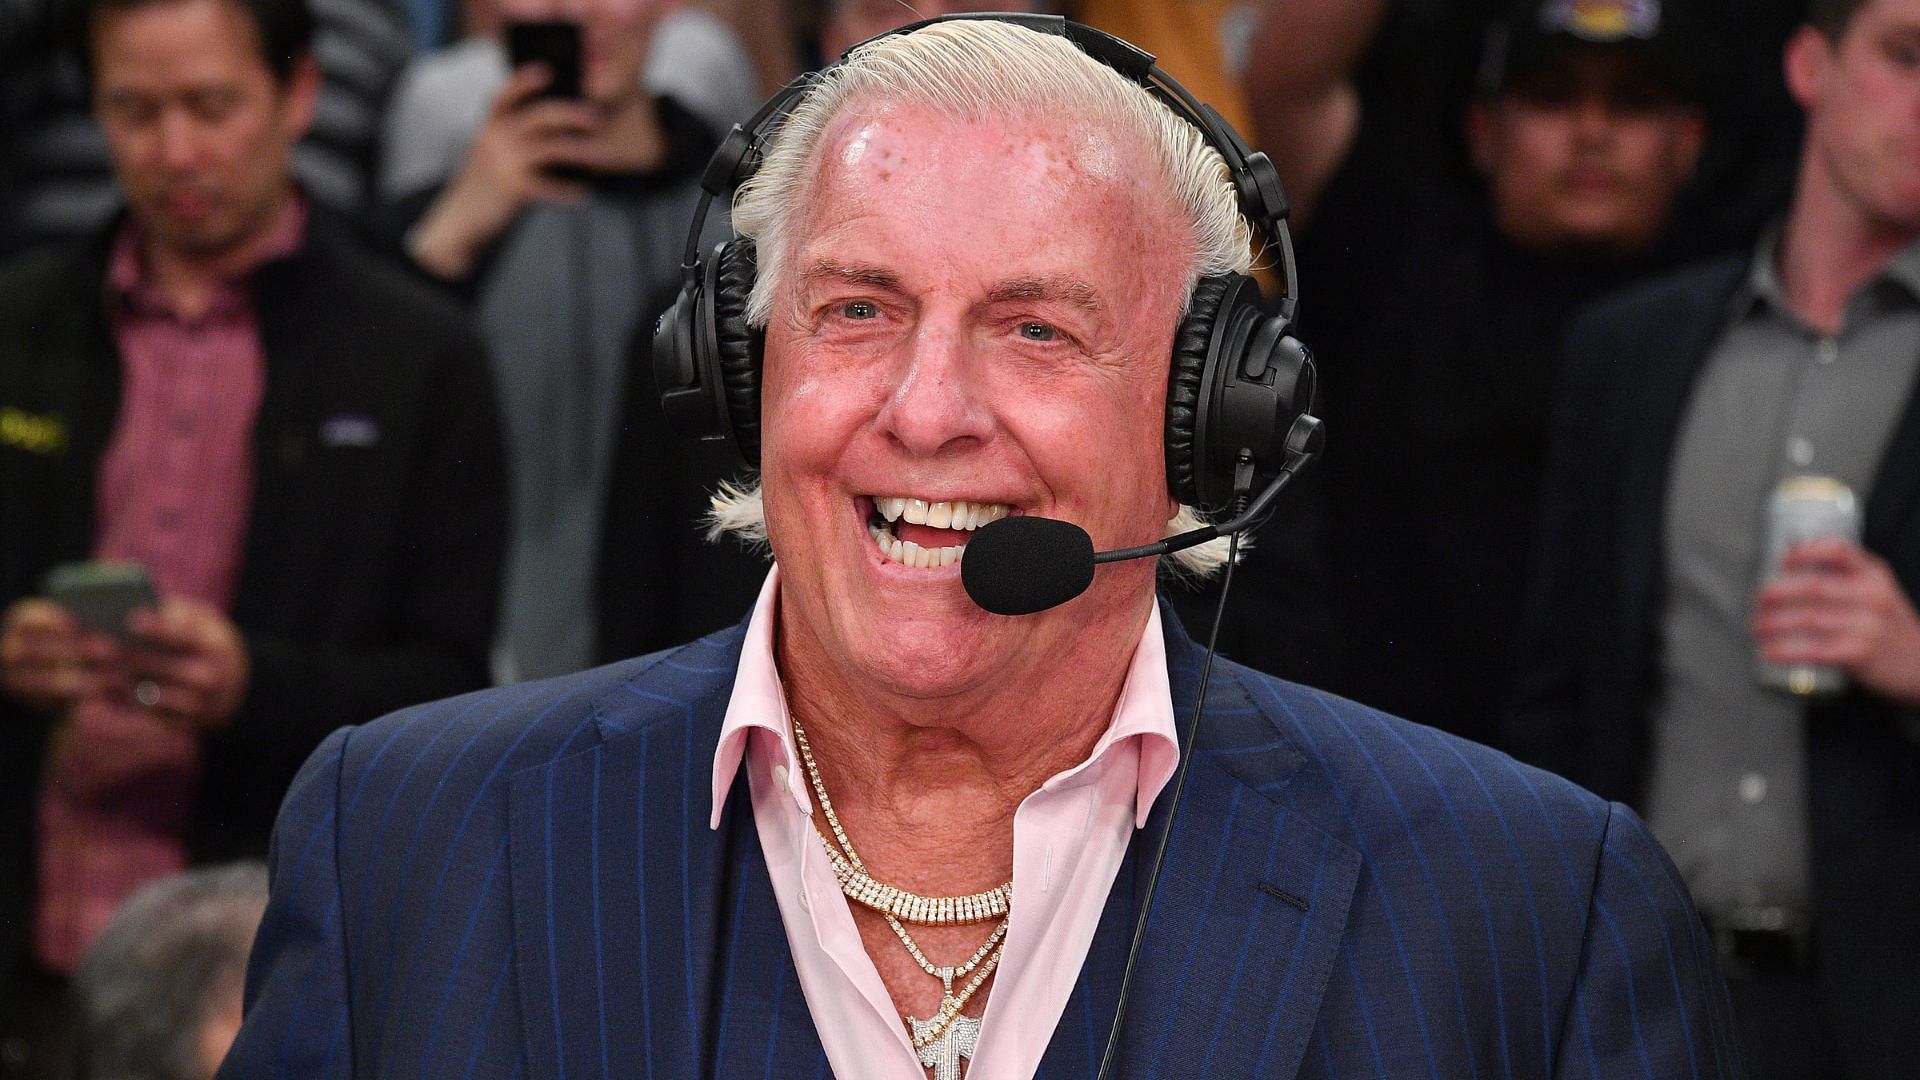 Will The Nature Boy return to in-ring action?